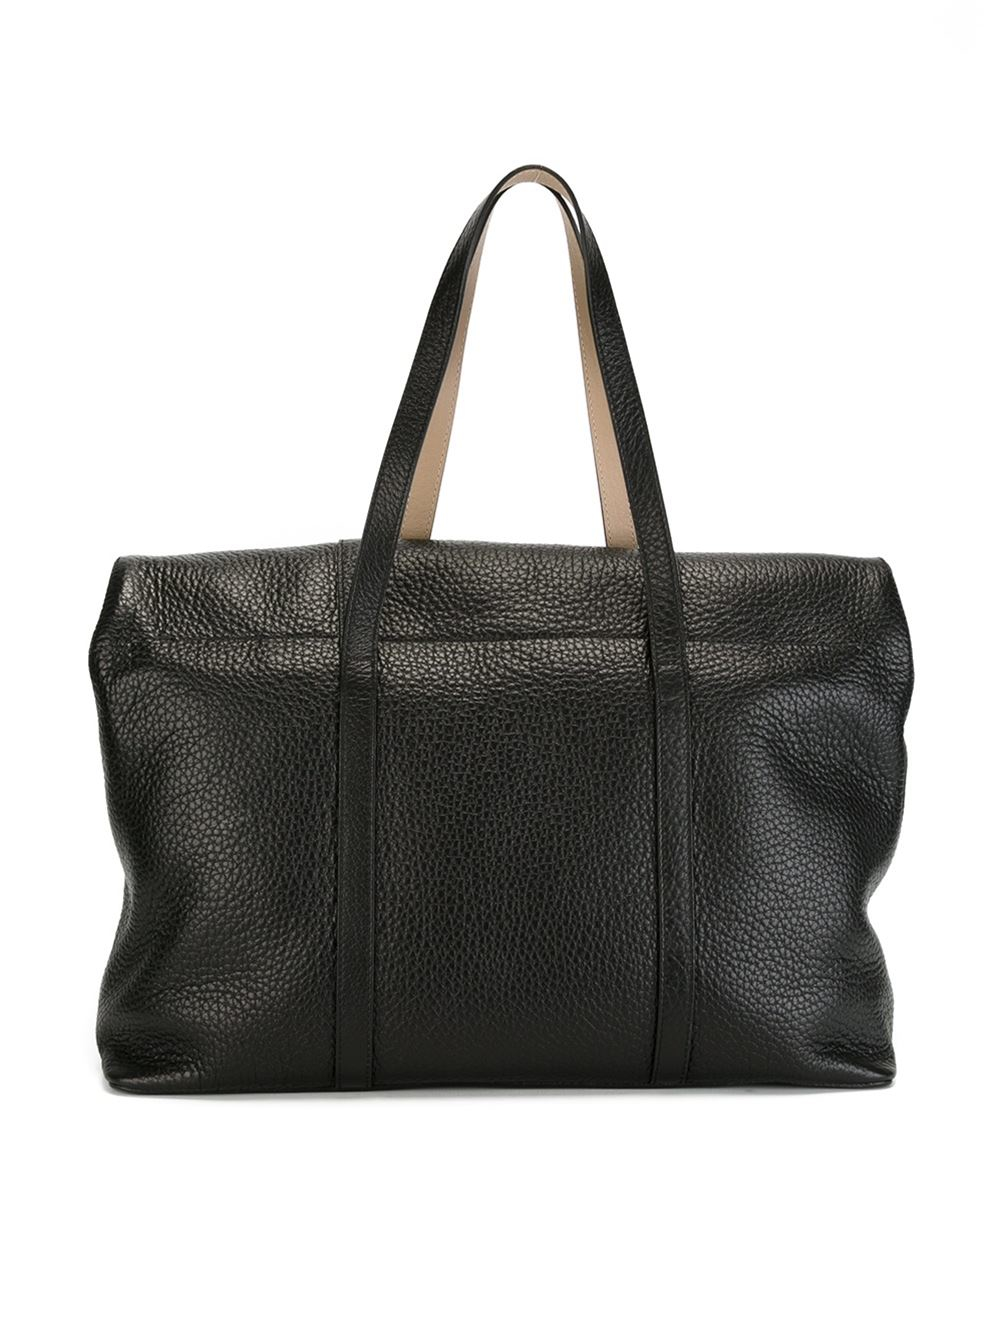 Orciani Large Rectangular Tote in Black | Lyst